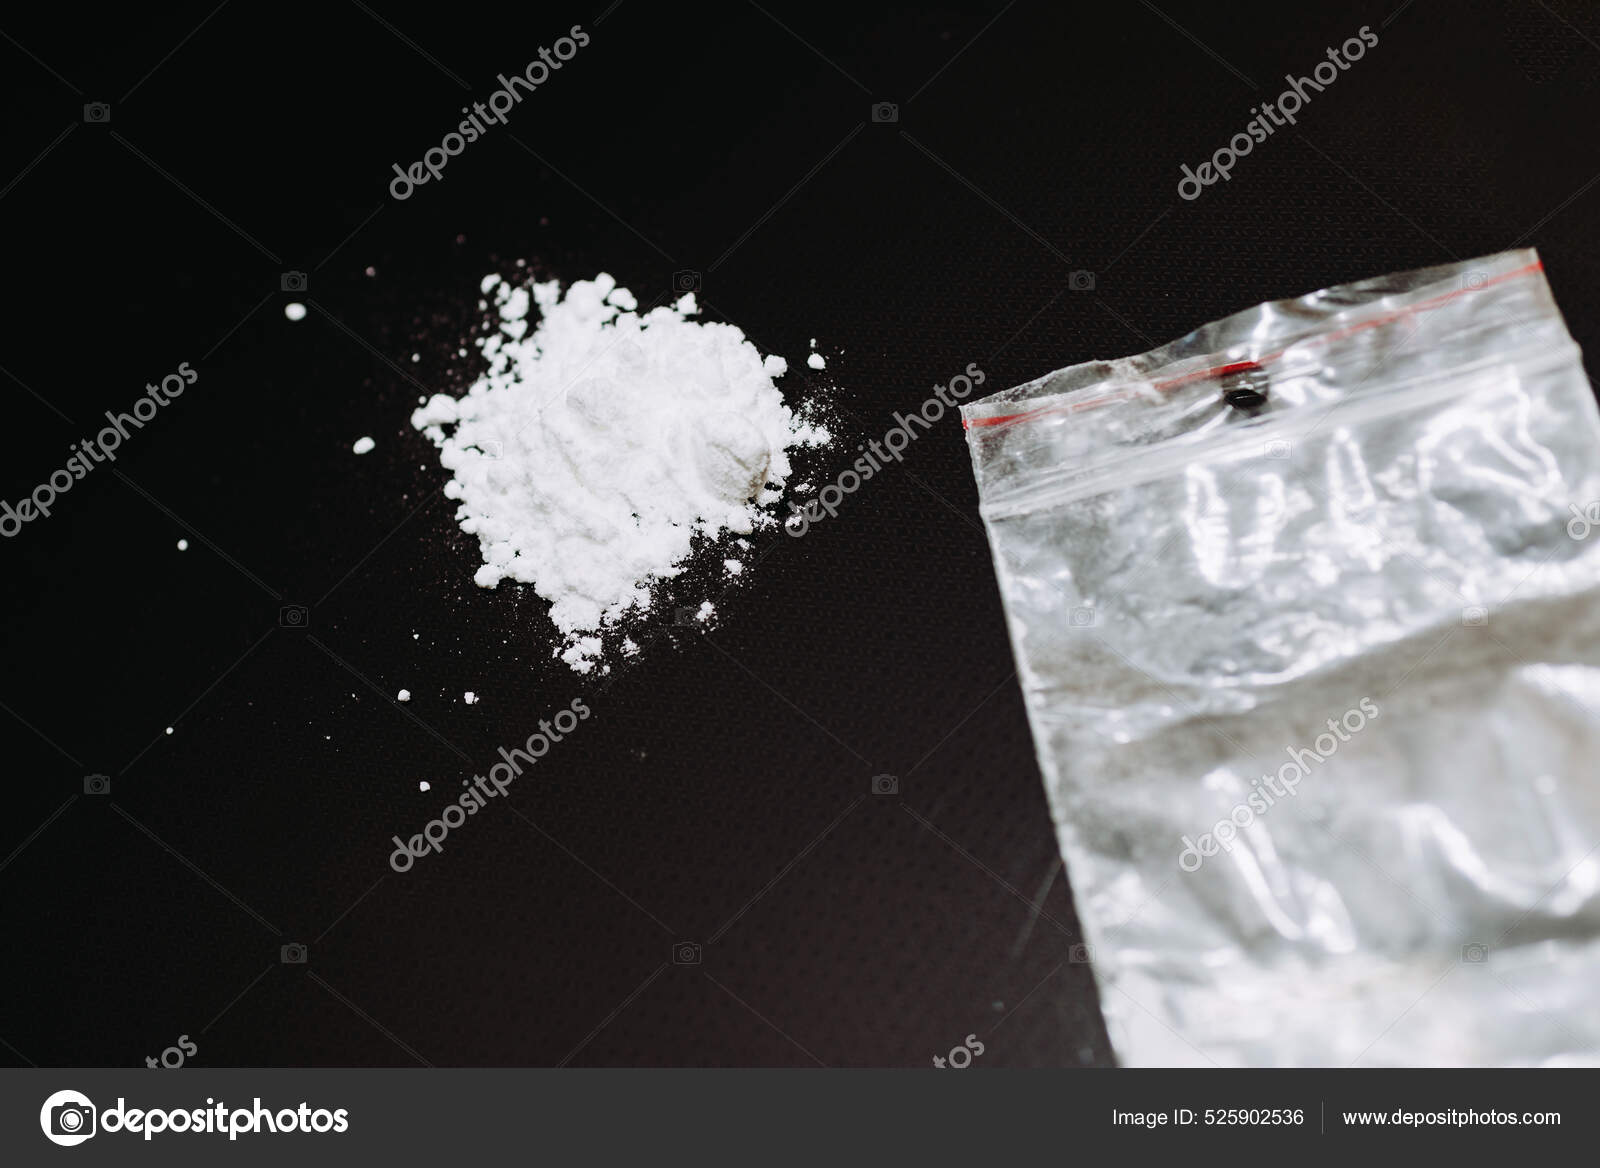 close up pile of cocaine in paper and vodka on black background